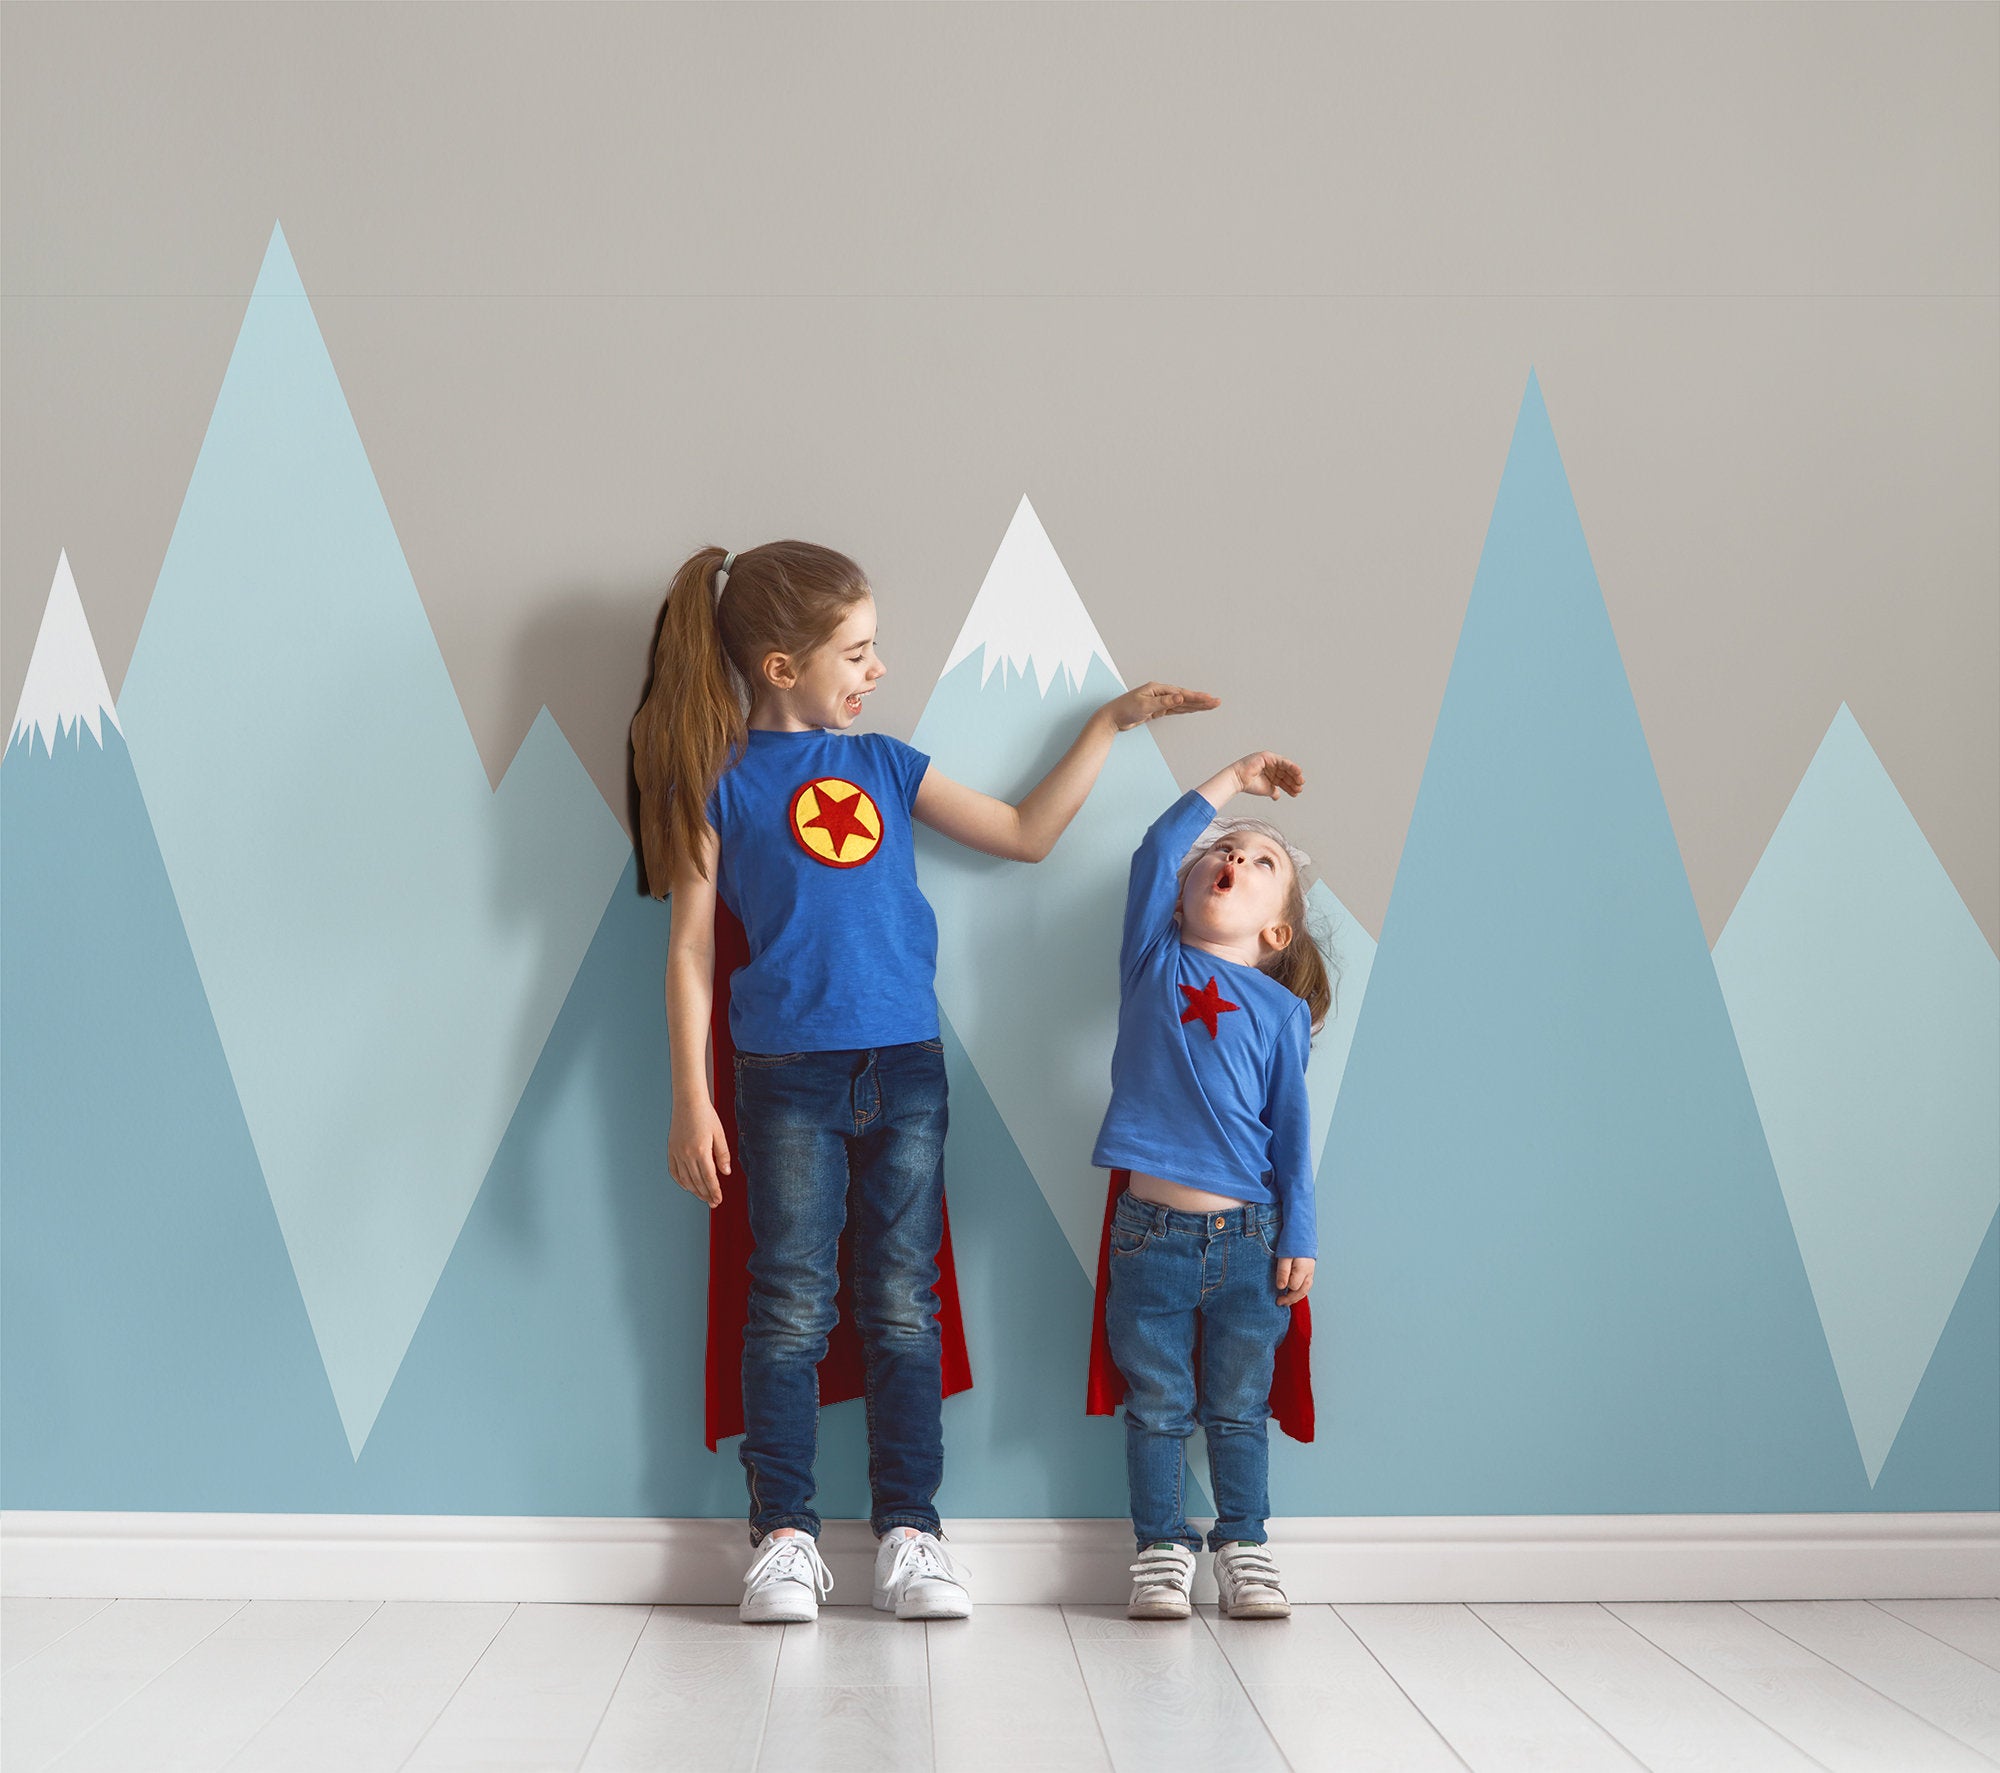 Snowy Blue Triangle Row of Mountains Wallpaper Self Adhesive Peel and Stick Home House Wall Decoration Minimalistic Scandinavian Removable